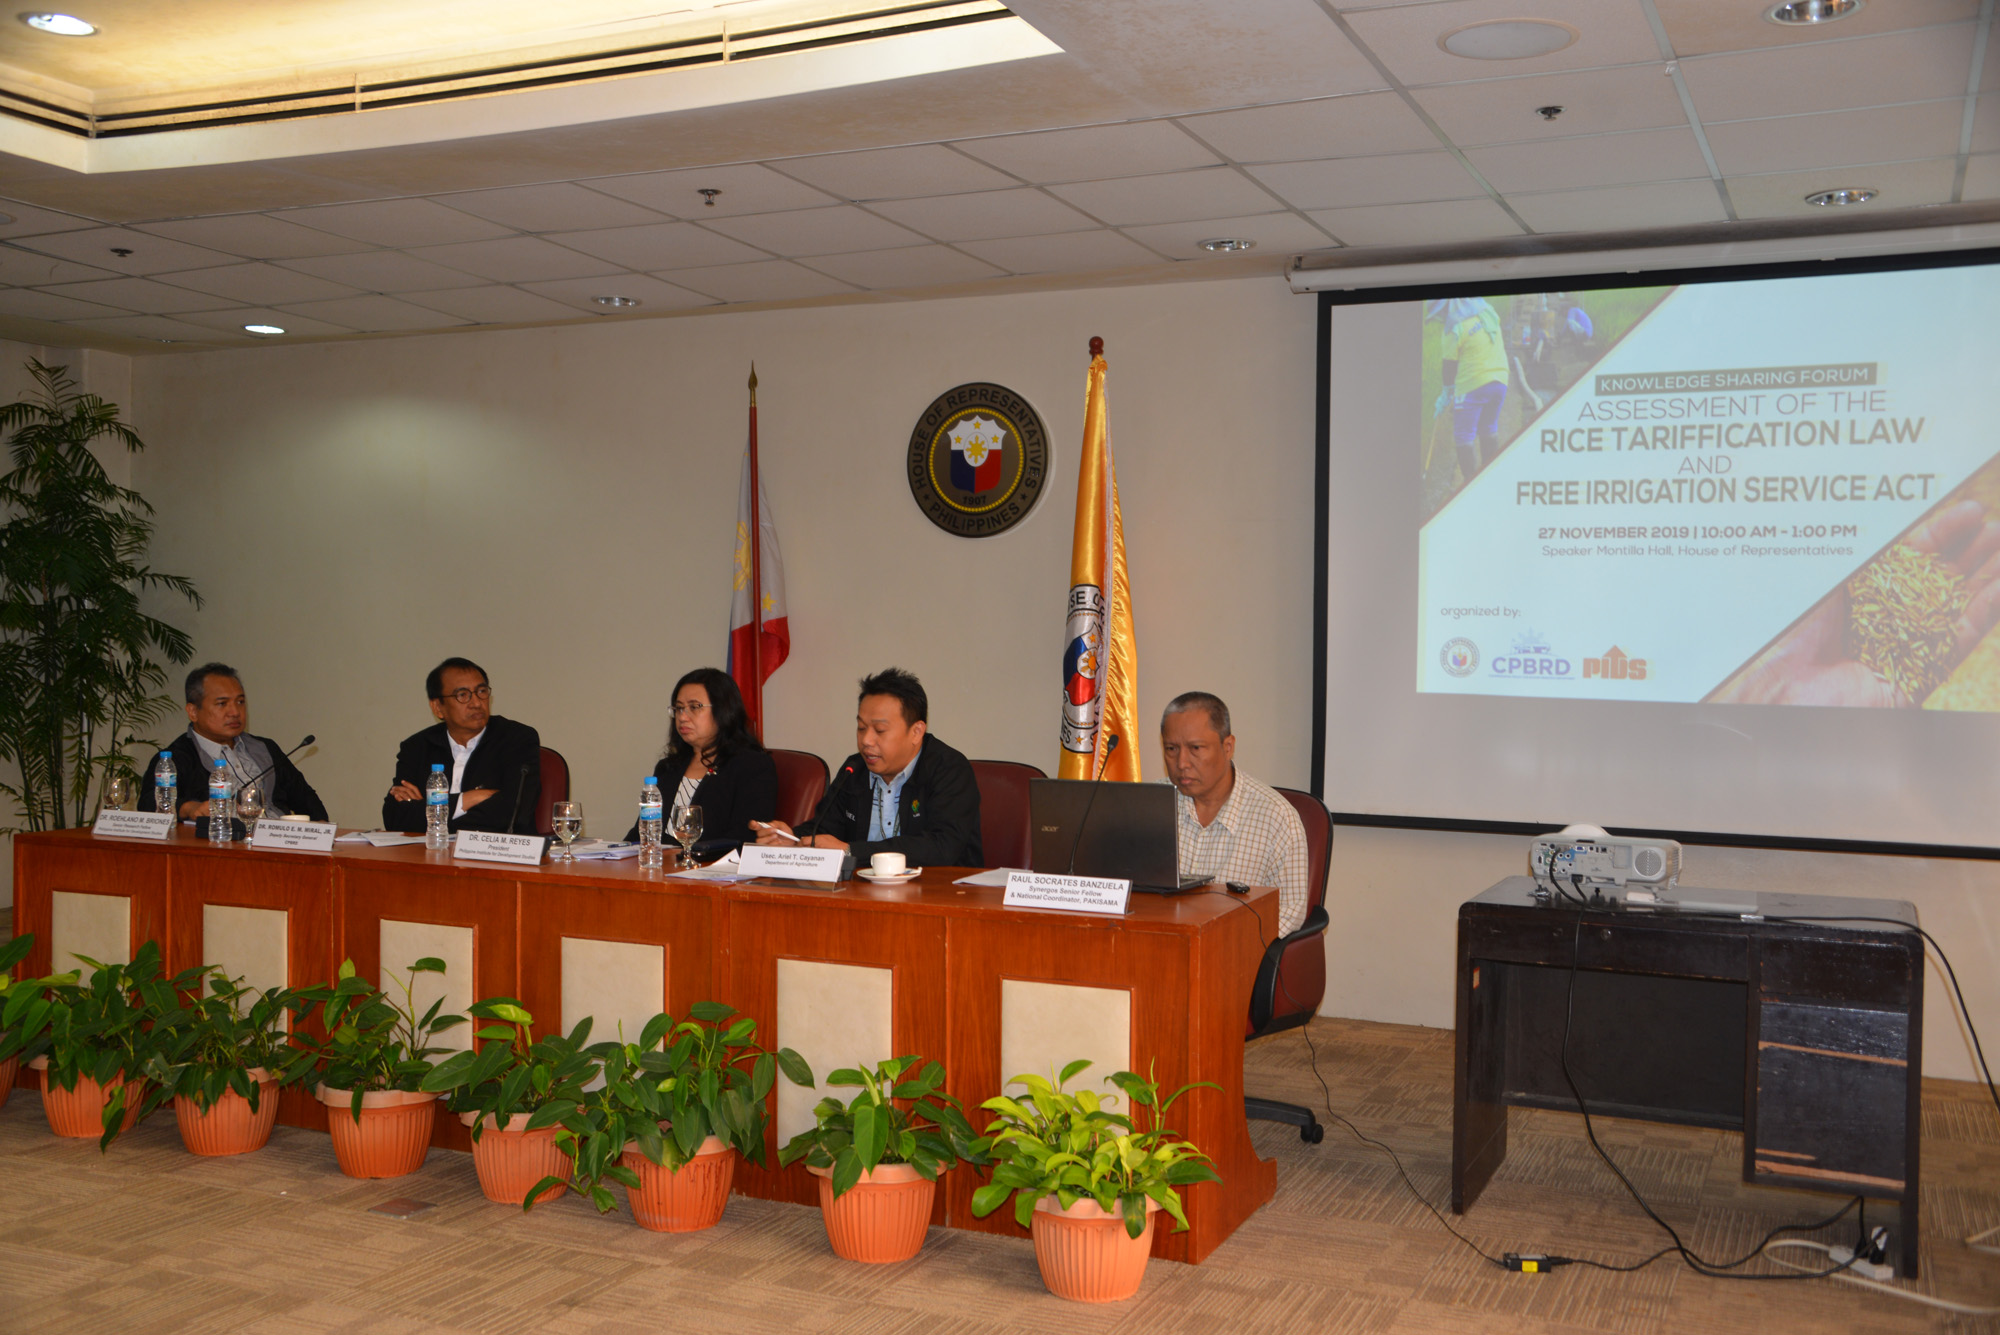 PIDS-CPBRD Knowledge Sharing Forum on the Assessment of the Rice Tariffication Law (RA 11203) and Free Irrigation Service Act (RA 10969)-pids-cpbrd-1-20191127.jpg